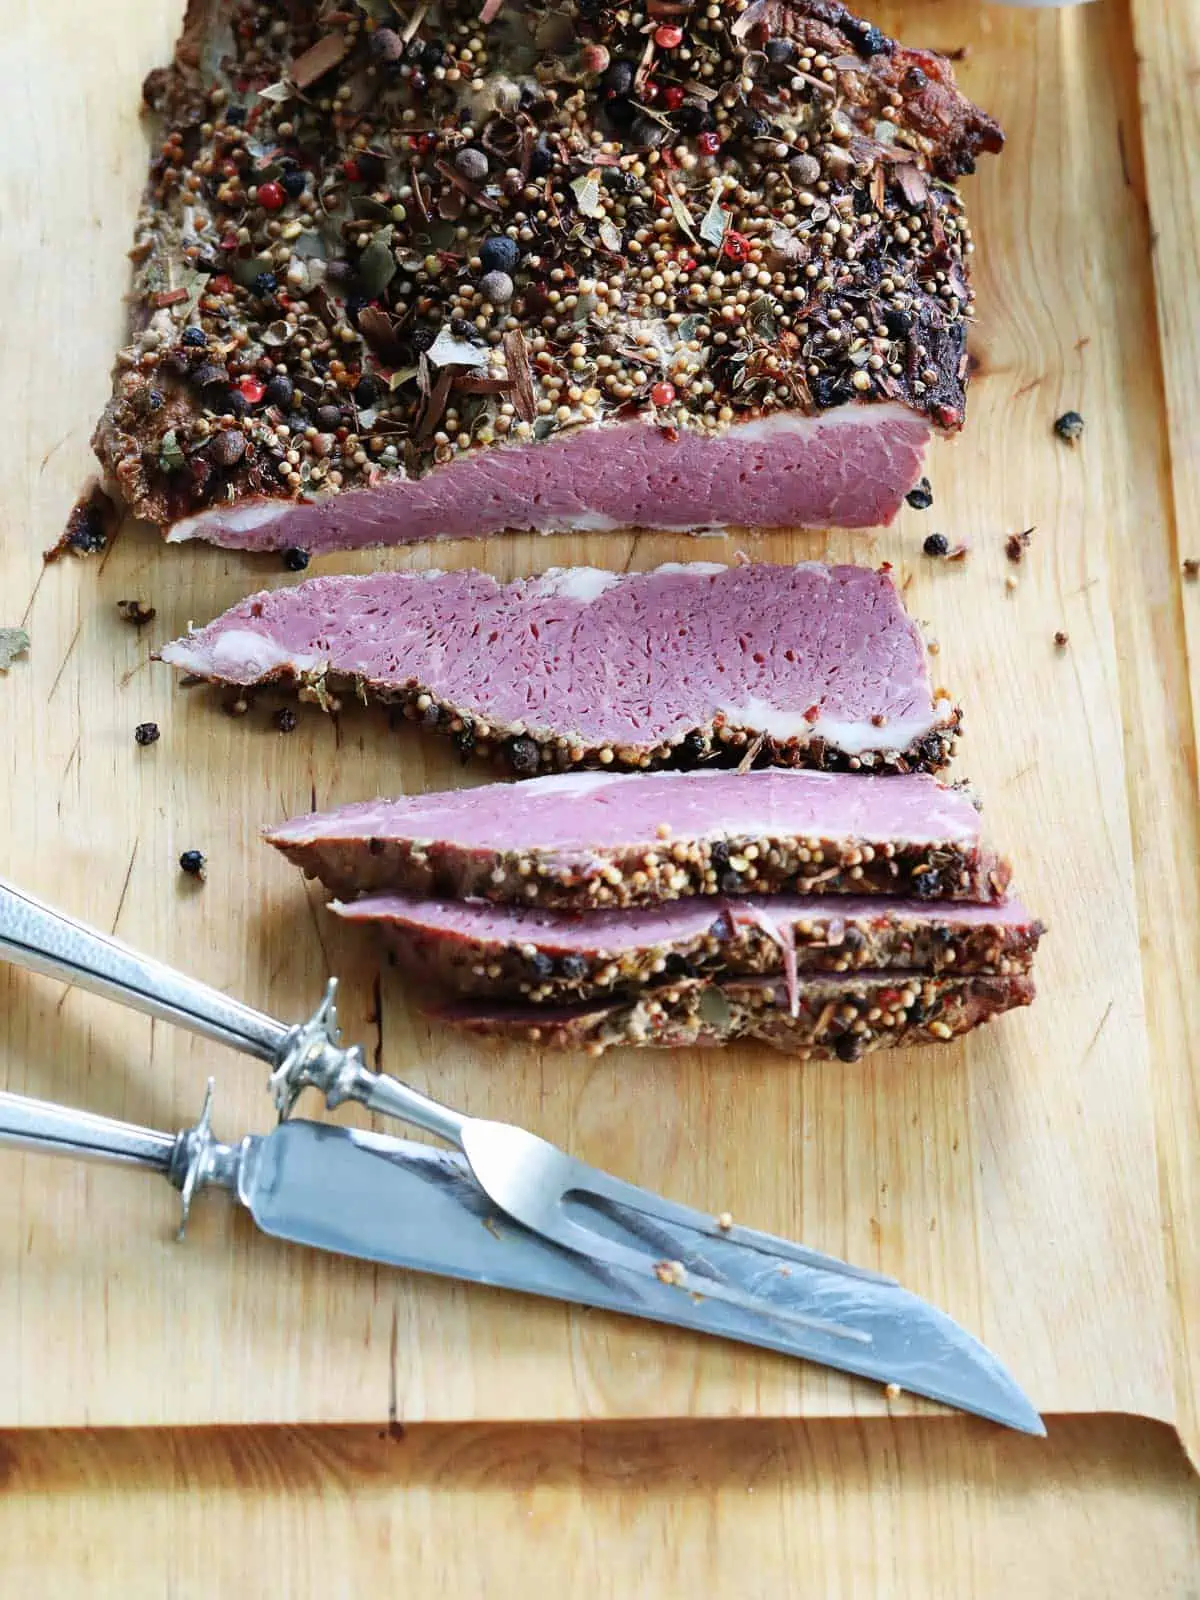 Long slices of corned beef brisket on a wood cutting board with a silver carving set.